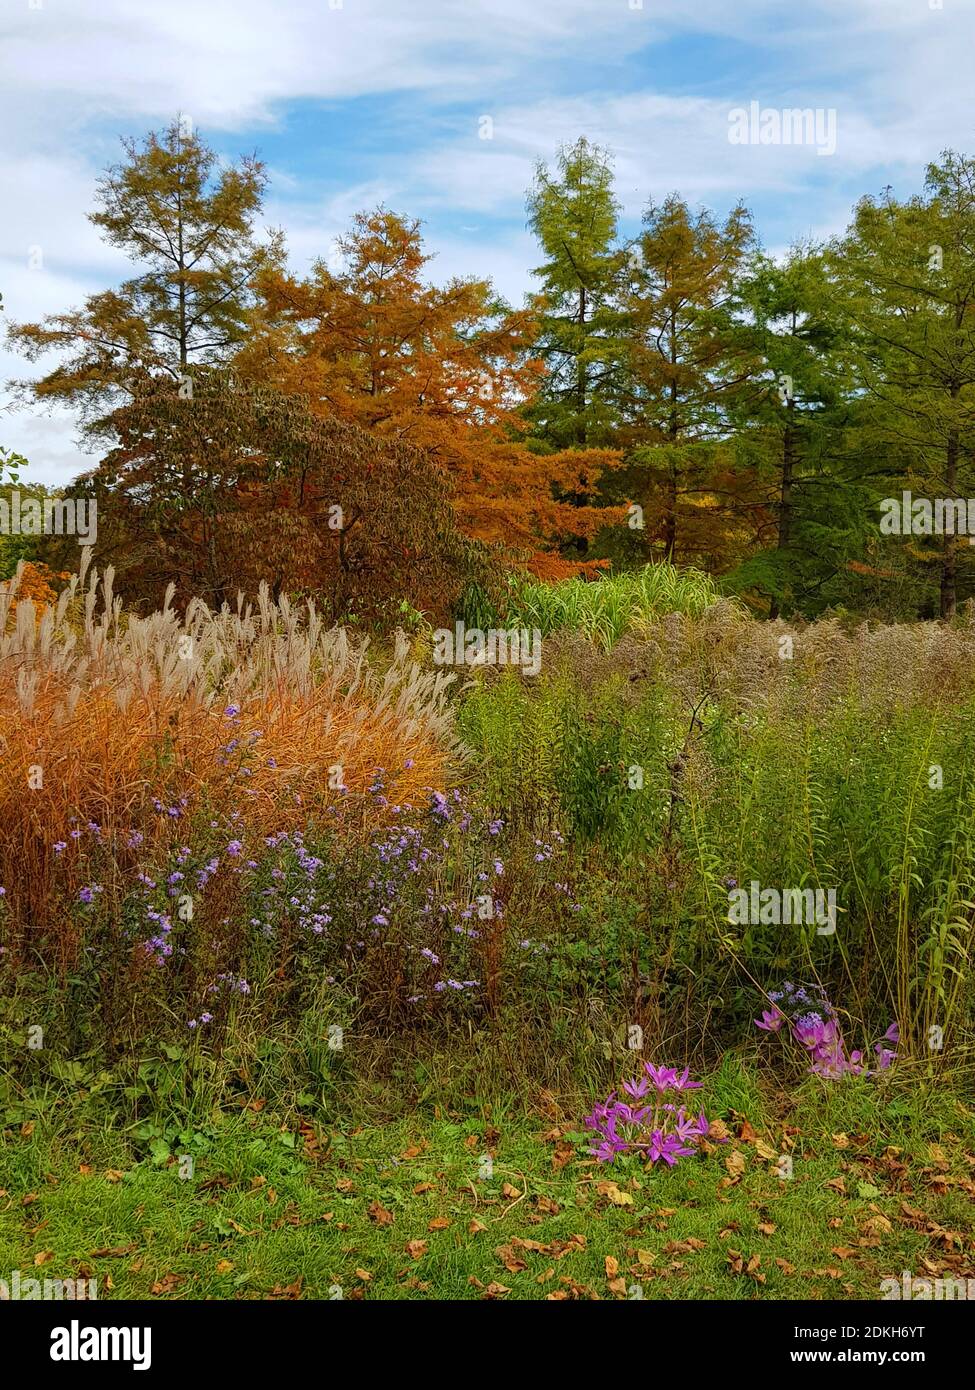 Westpark, autumn, tall, colorful grass, trees, lots of autumn leaves Stock Photo